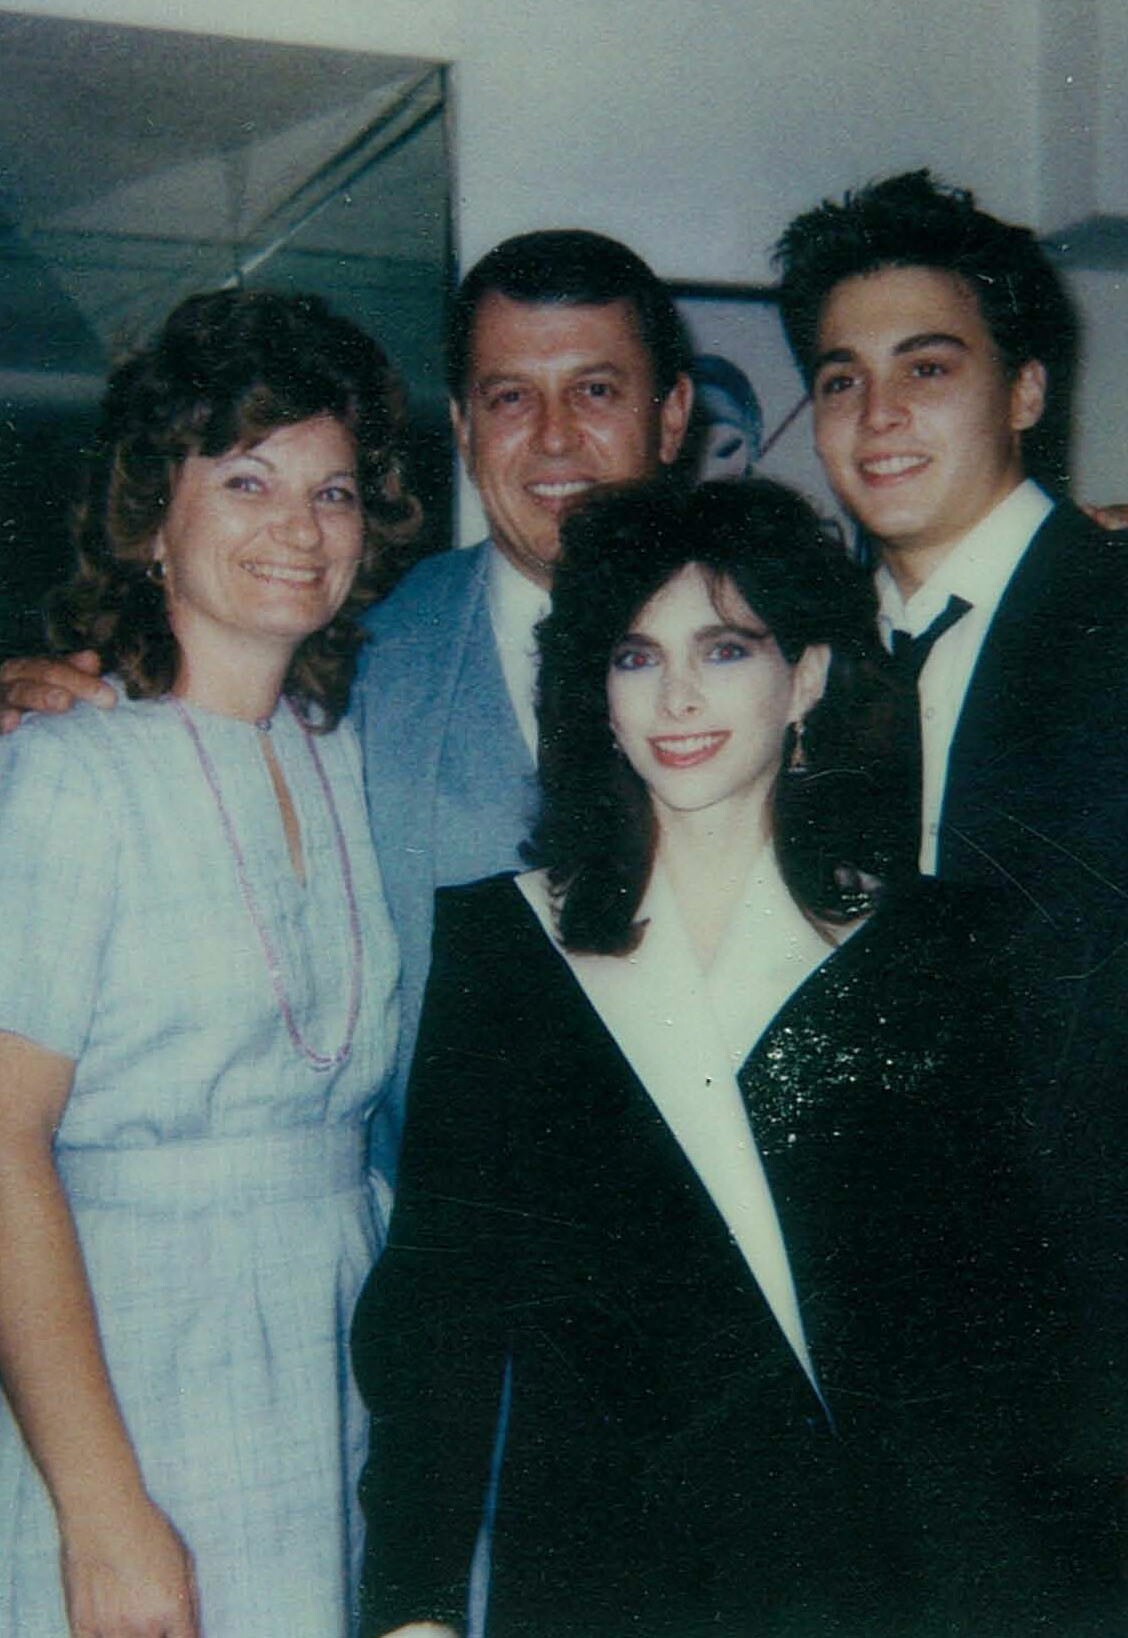 A young and unknown at the time Johnny Depp with his parents and first wife Lori Depp in 1983. She was 26 and he was 20 when they tied the knot. The marriage lasted just 3 years.